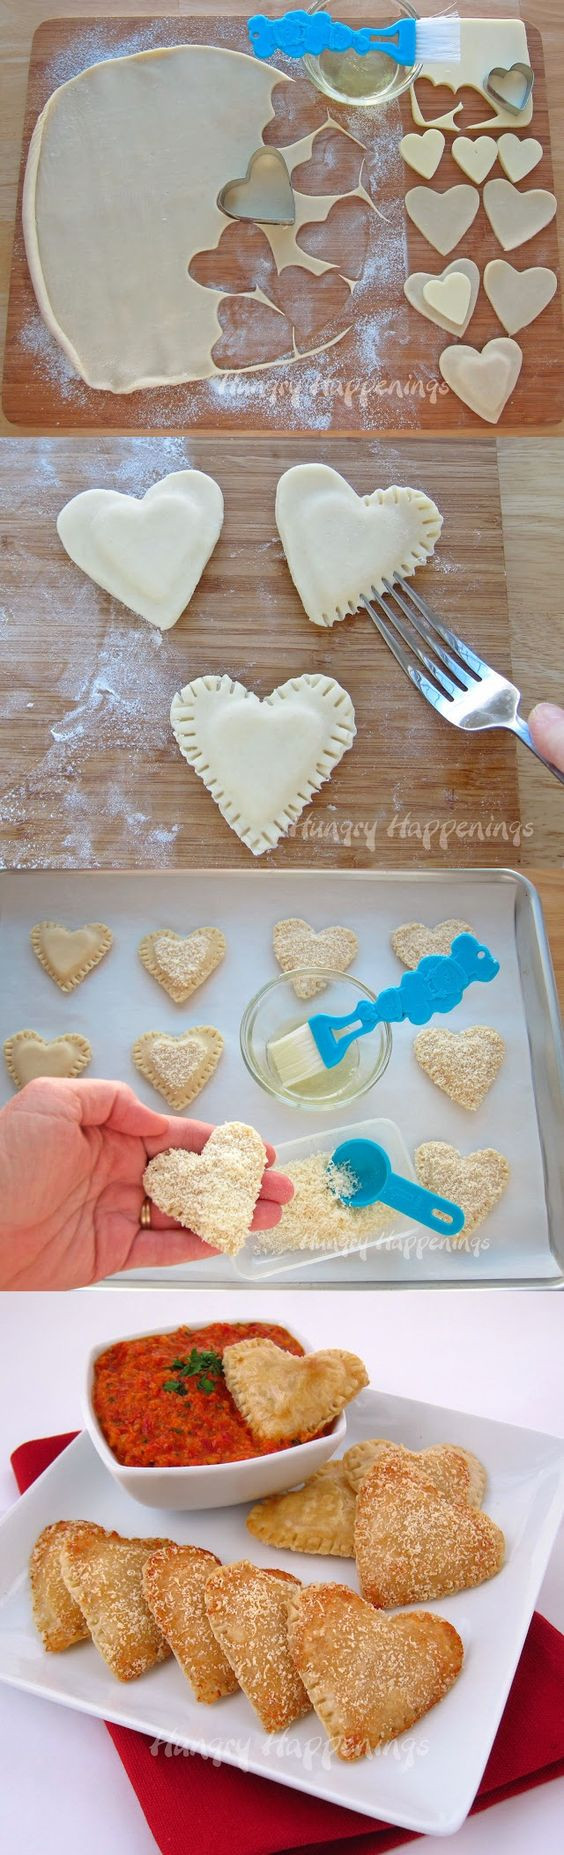 Dinner Recipes Using Pie Crust
 Mozzarella Cheese Filled Hearts – with Roasted Red Pepper